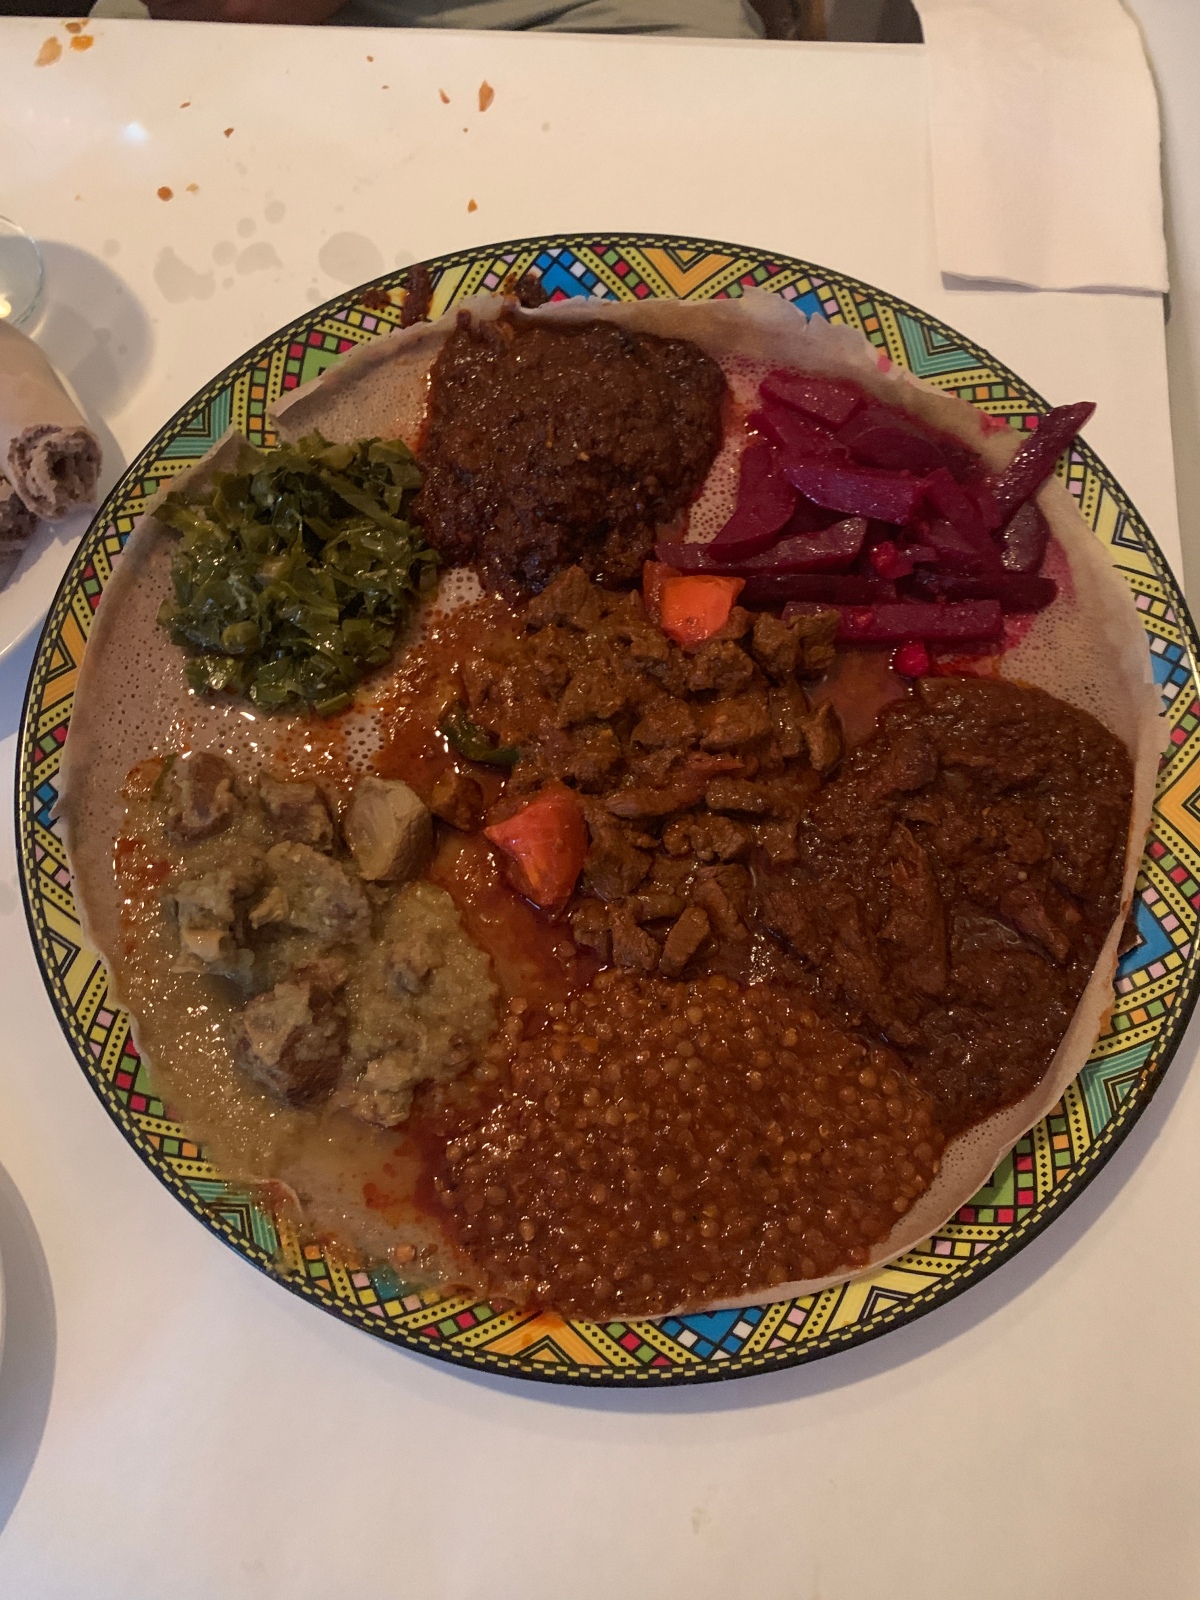 Sample platter from Awash Ethiopian restaurant on the Upper West Side in NYC